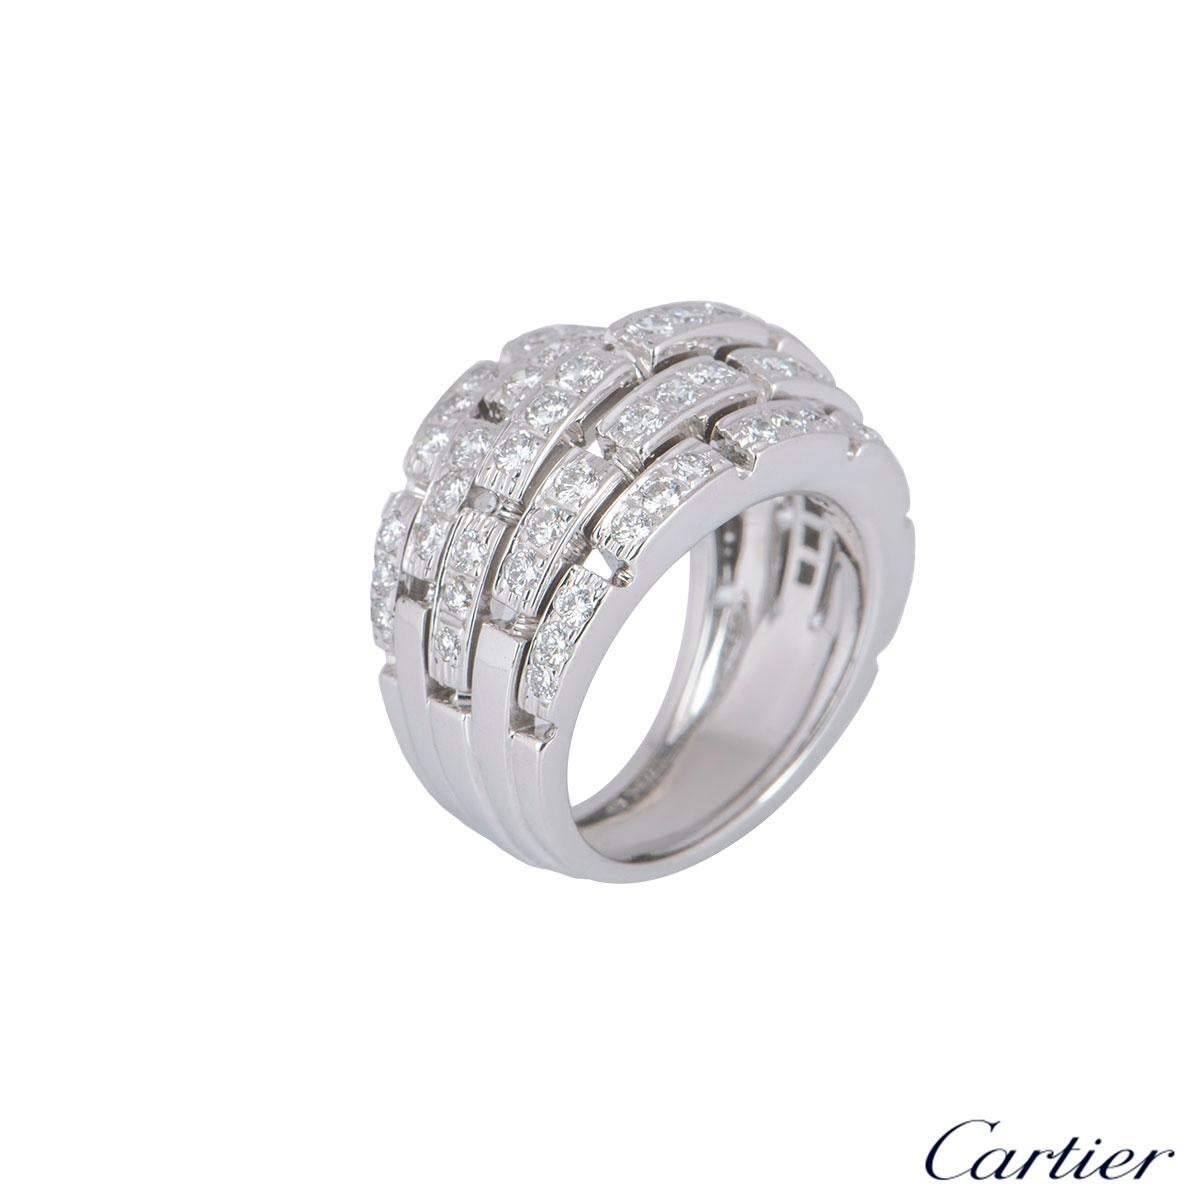 A stunning 18k white gold diamond ring by Cartier from the Maillon Panthere collection. The bombe style ring comprises of 5 rows in a brick style pattern partially set with 3 round brilliant cut diamonds on each panel. There are a total of 69